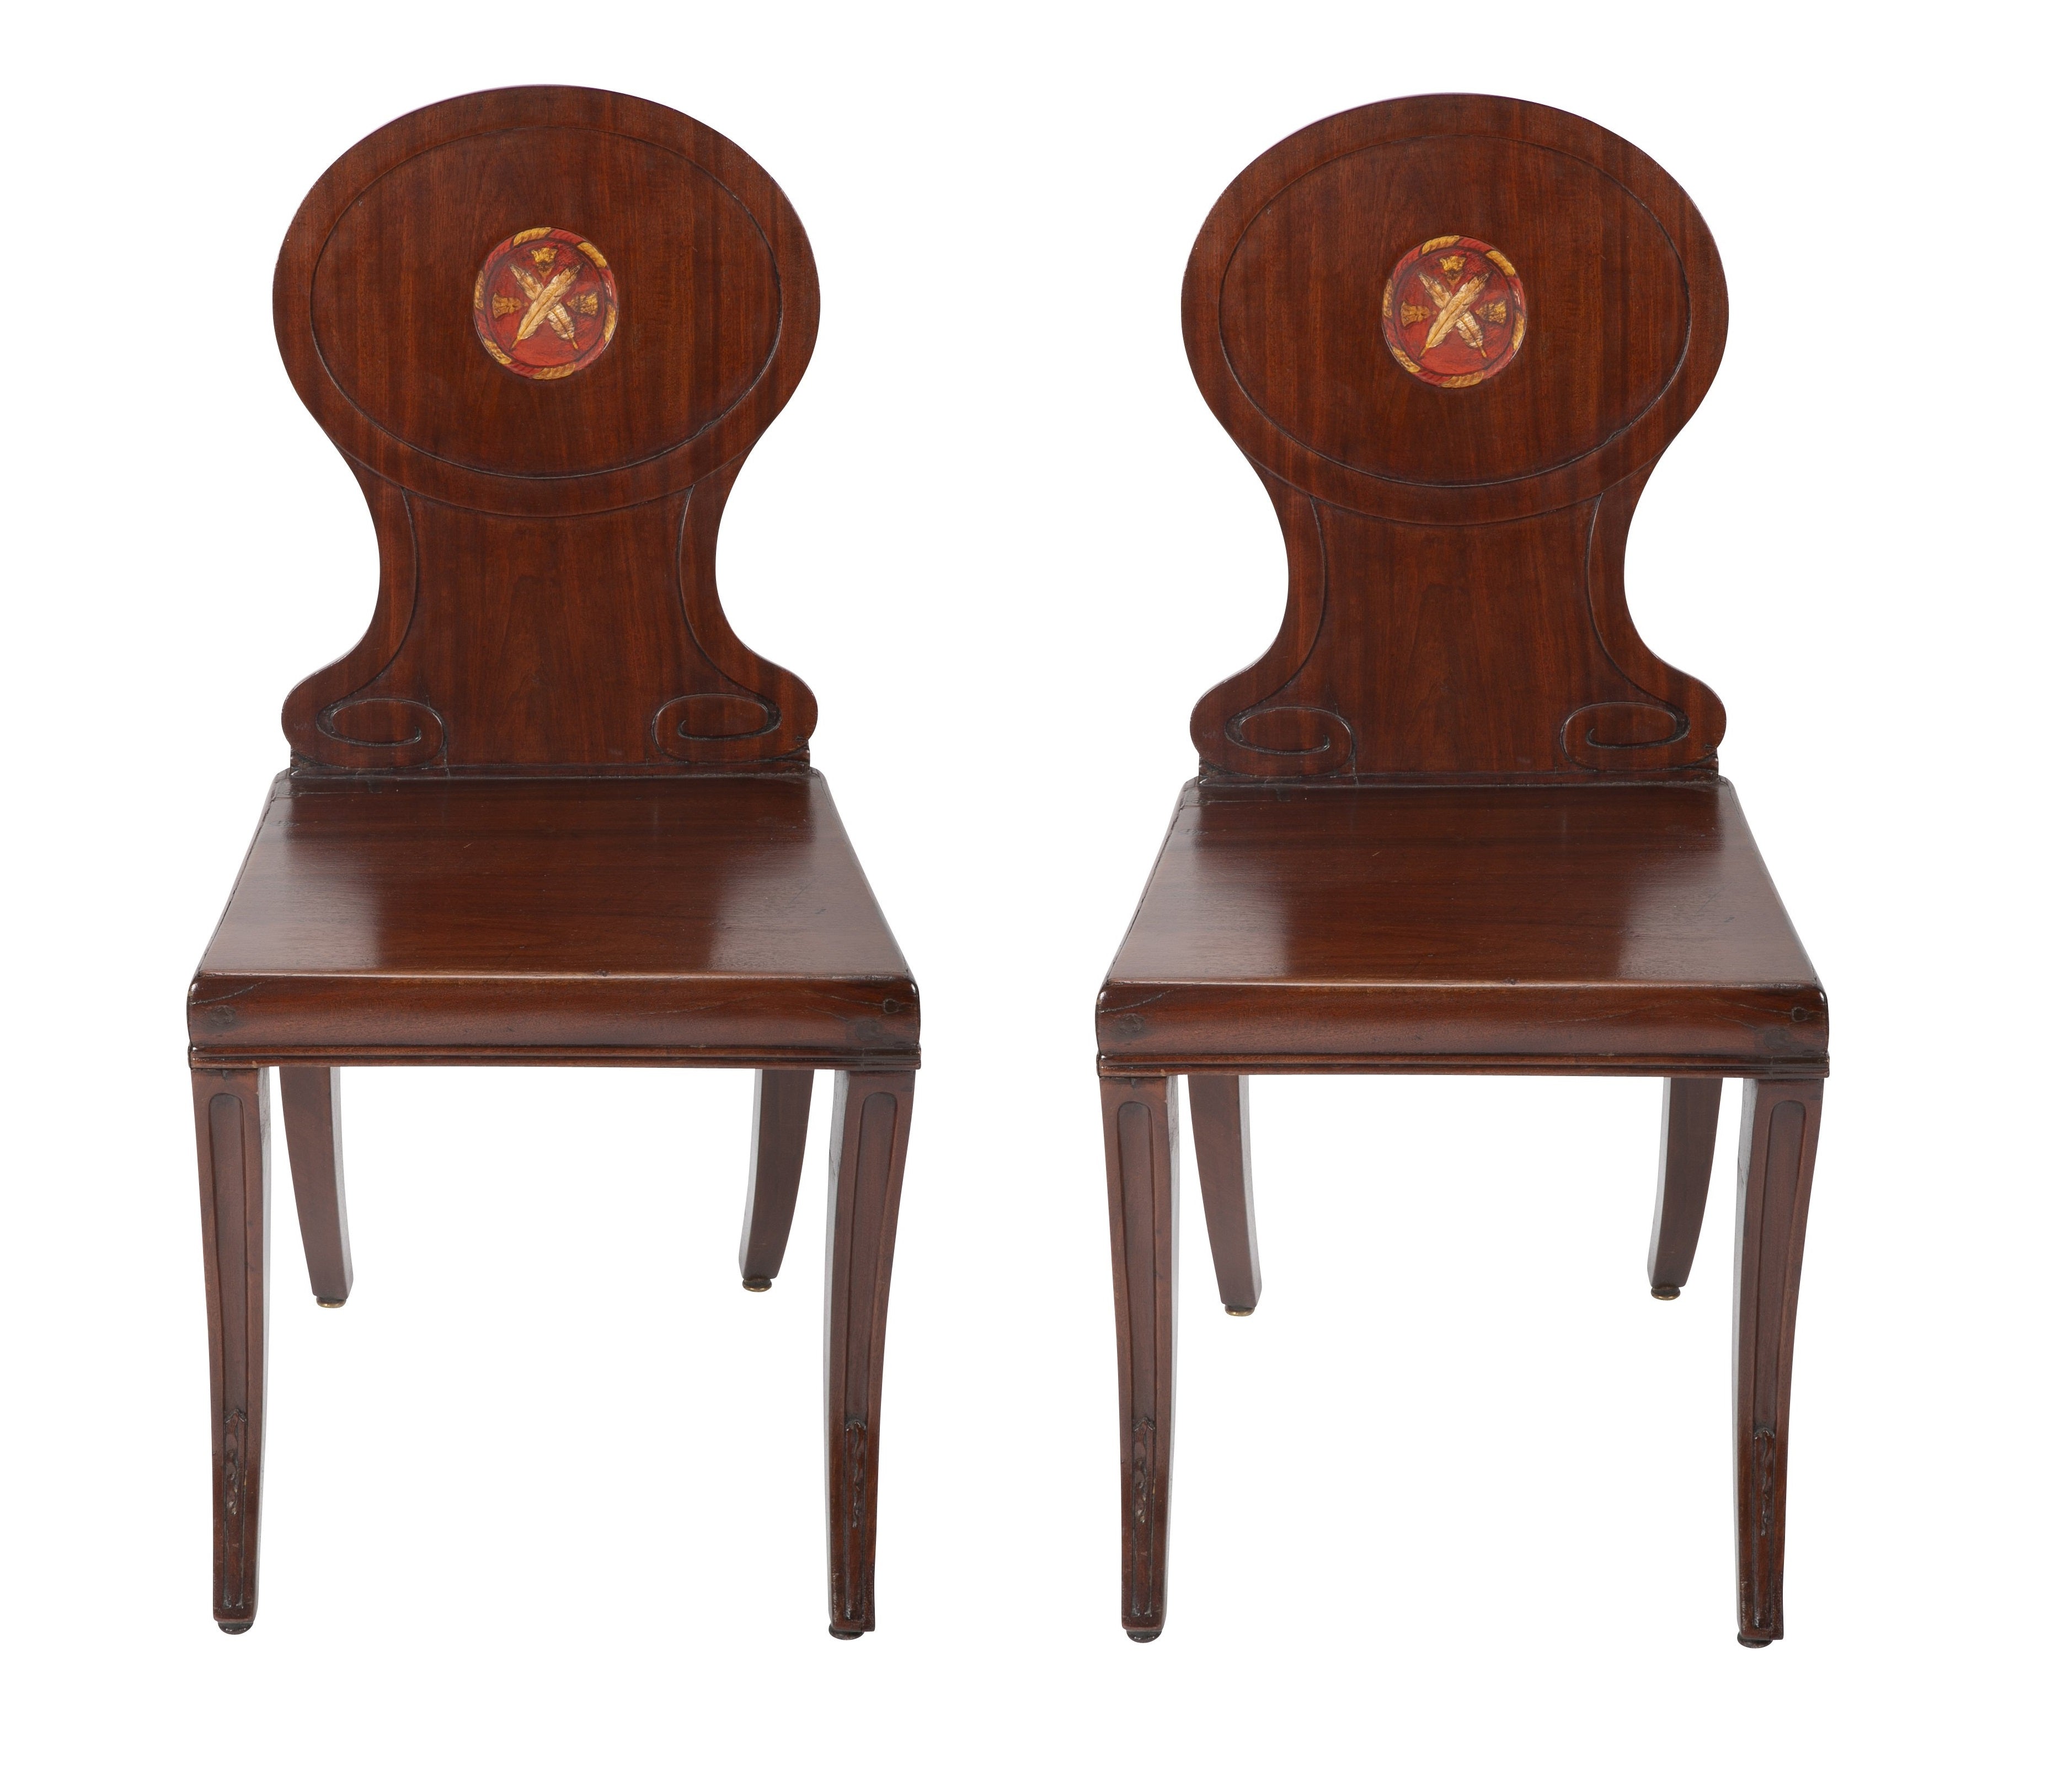 A Pair of Late Georgian Mahogany and Polychrome Hall Chairs